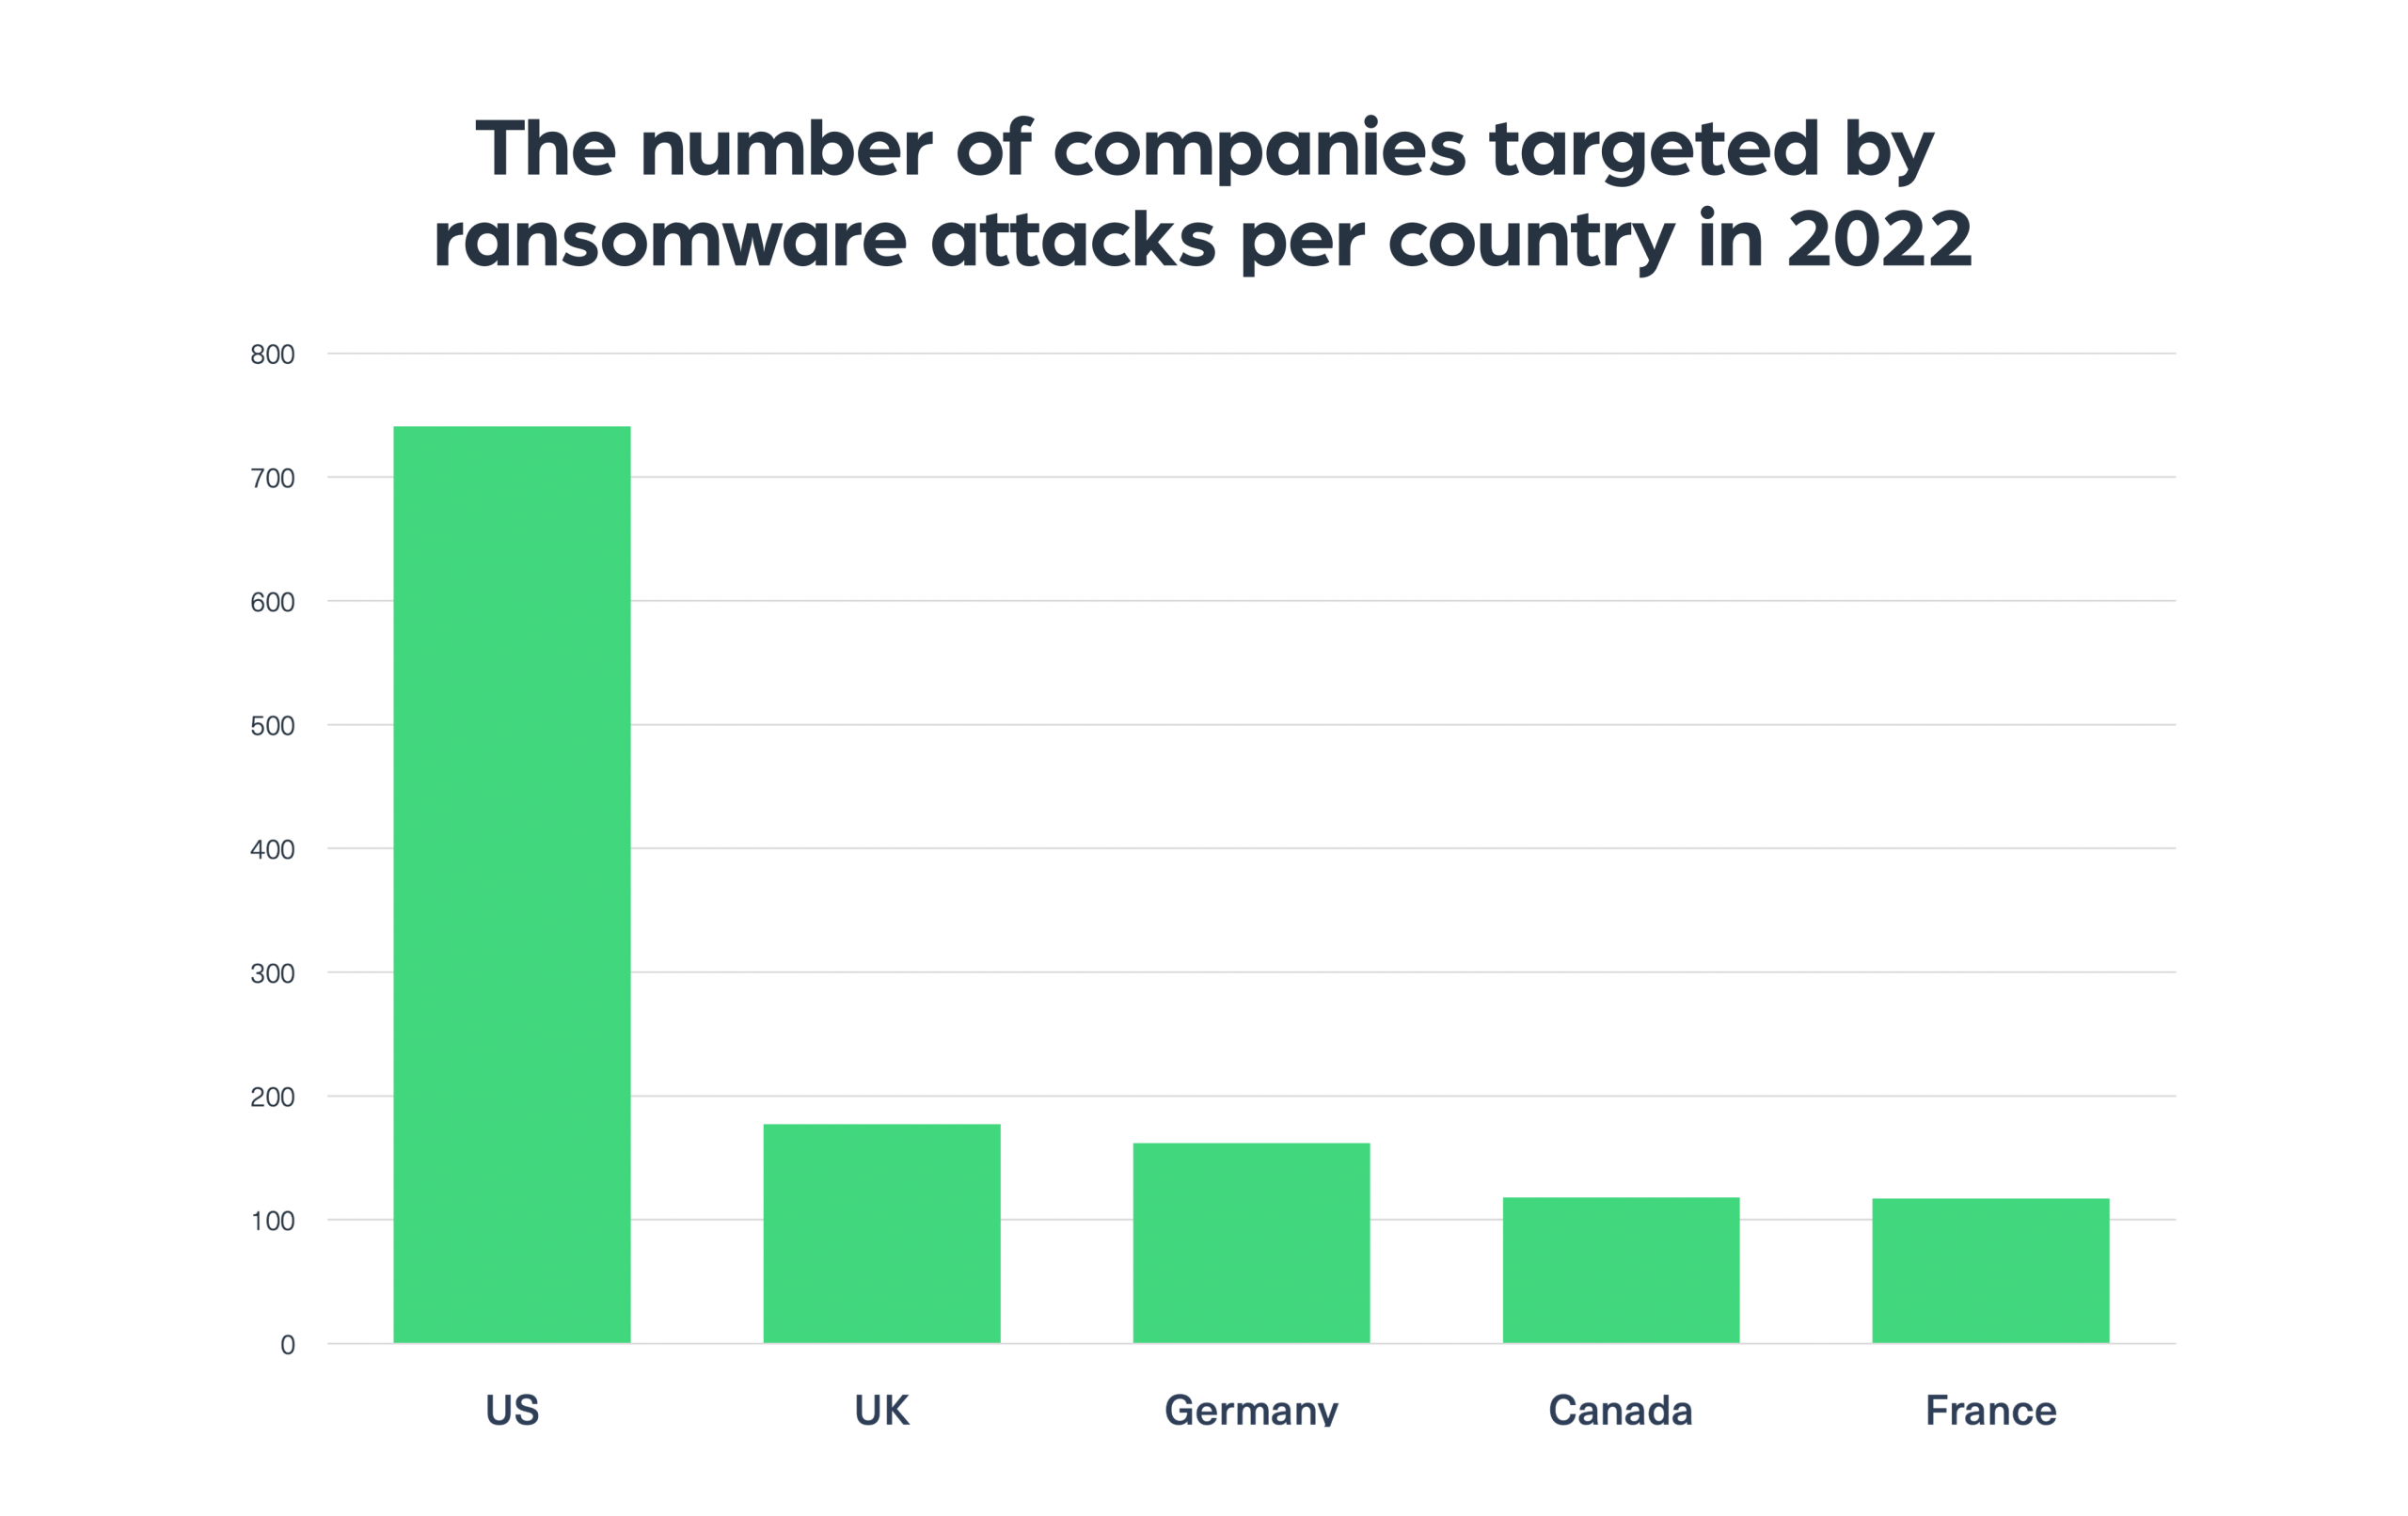 The number of companies targeted by ransomware attacks per country in 2022